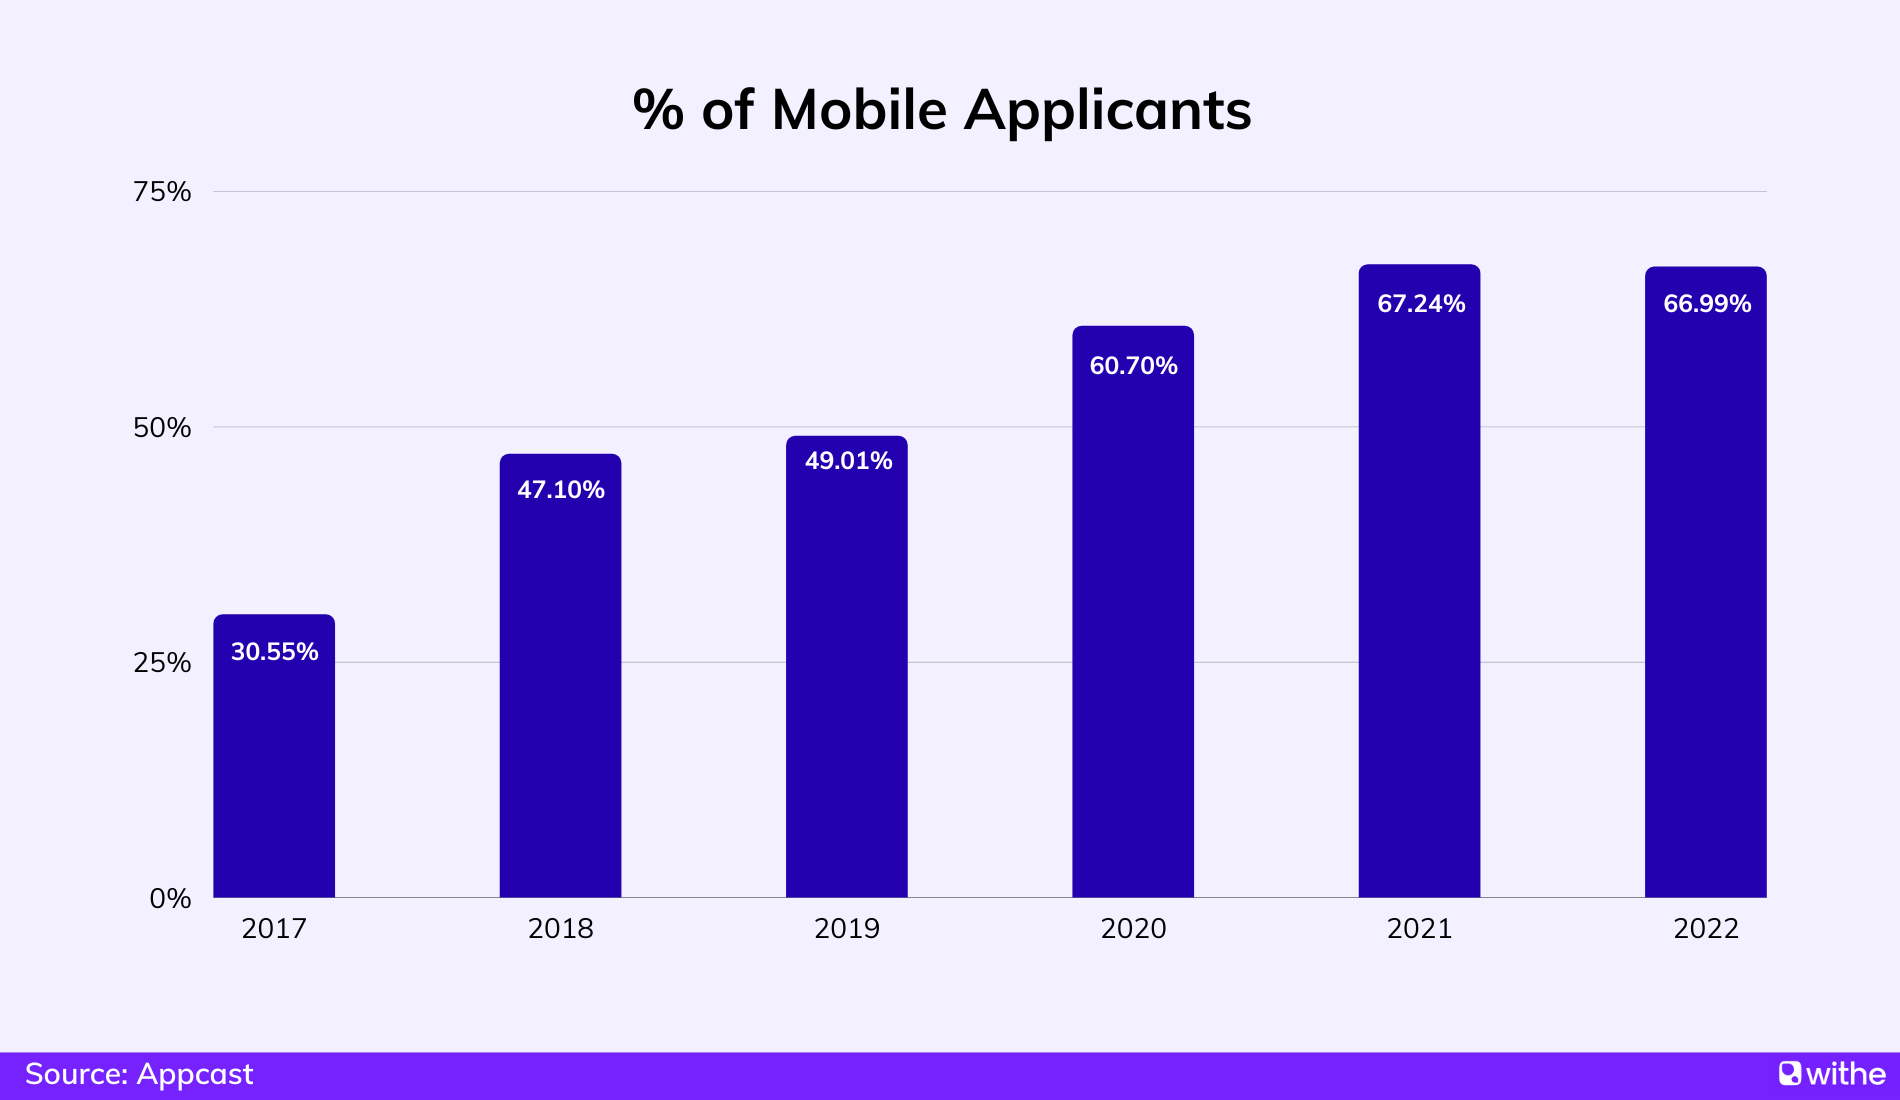 Percentage of mobile applicants from 2017-2022